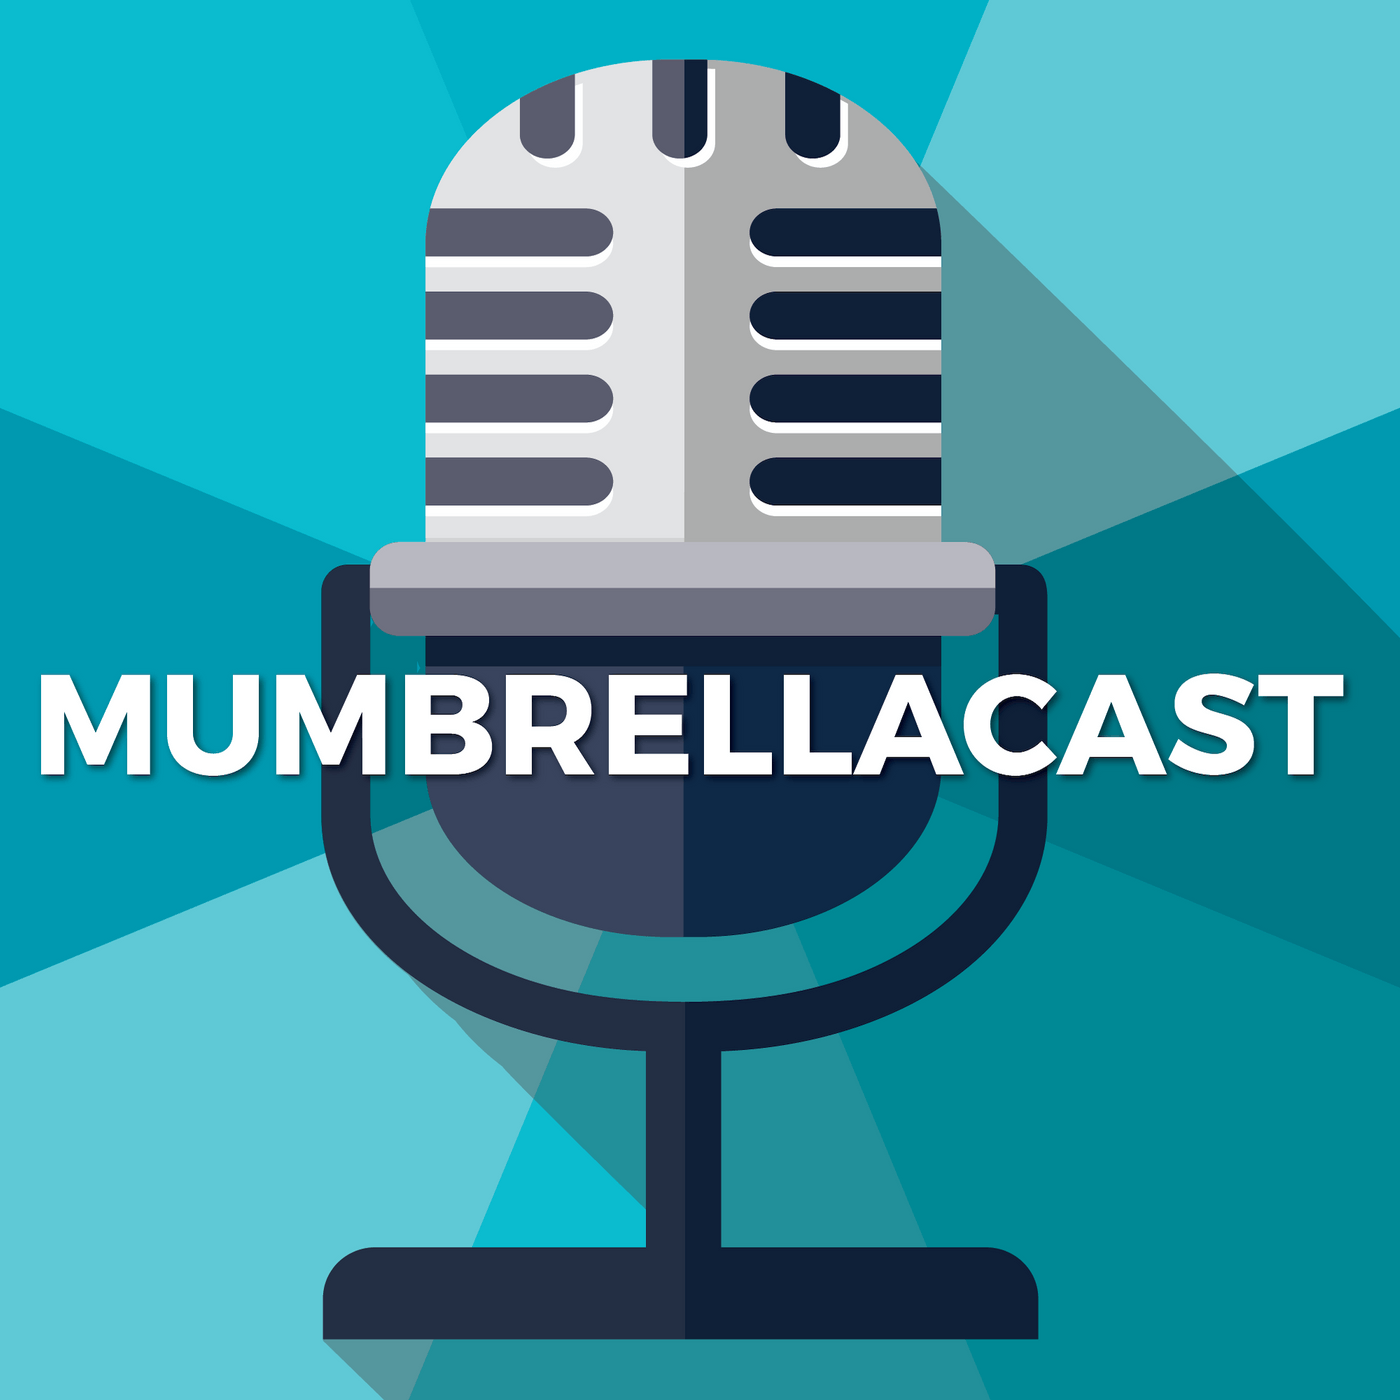 Mumbrellacast: Justin Hind; plus, advertising soars - but when will the bubble burst?